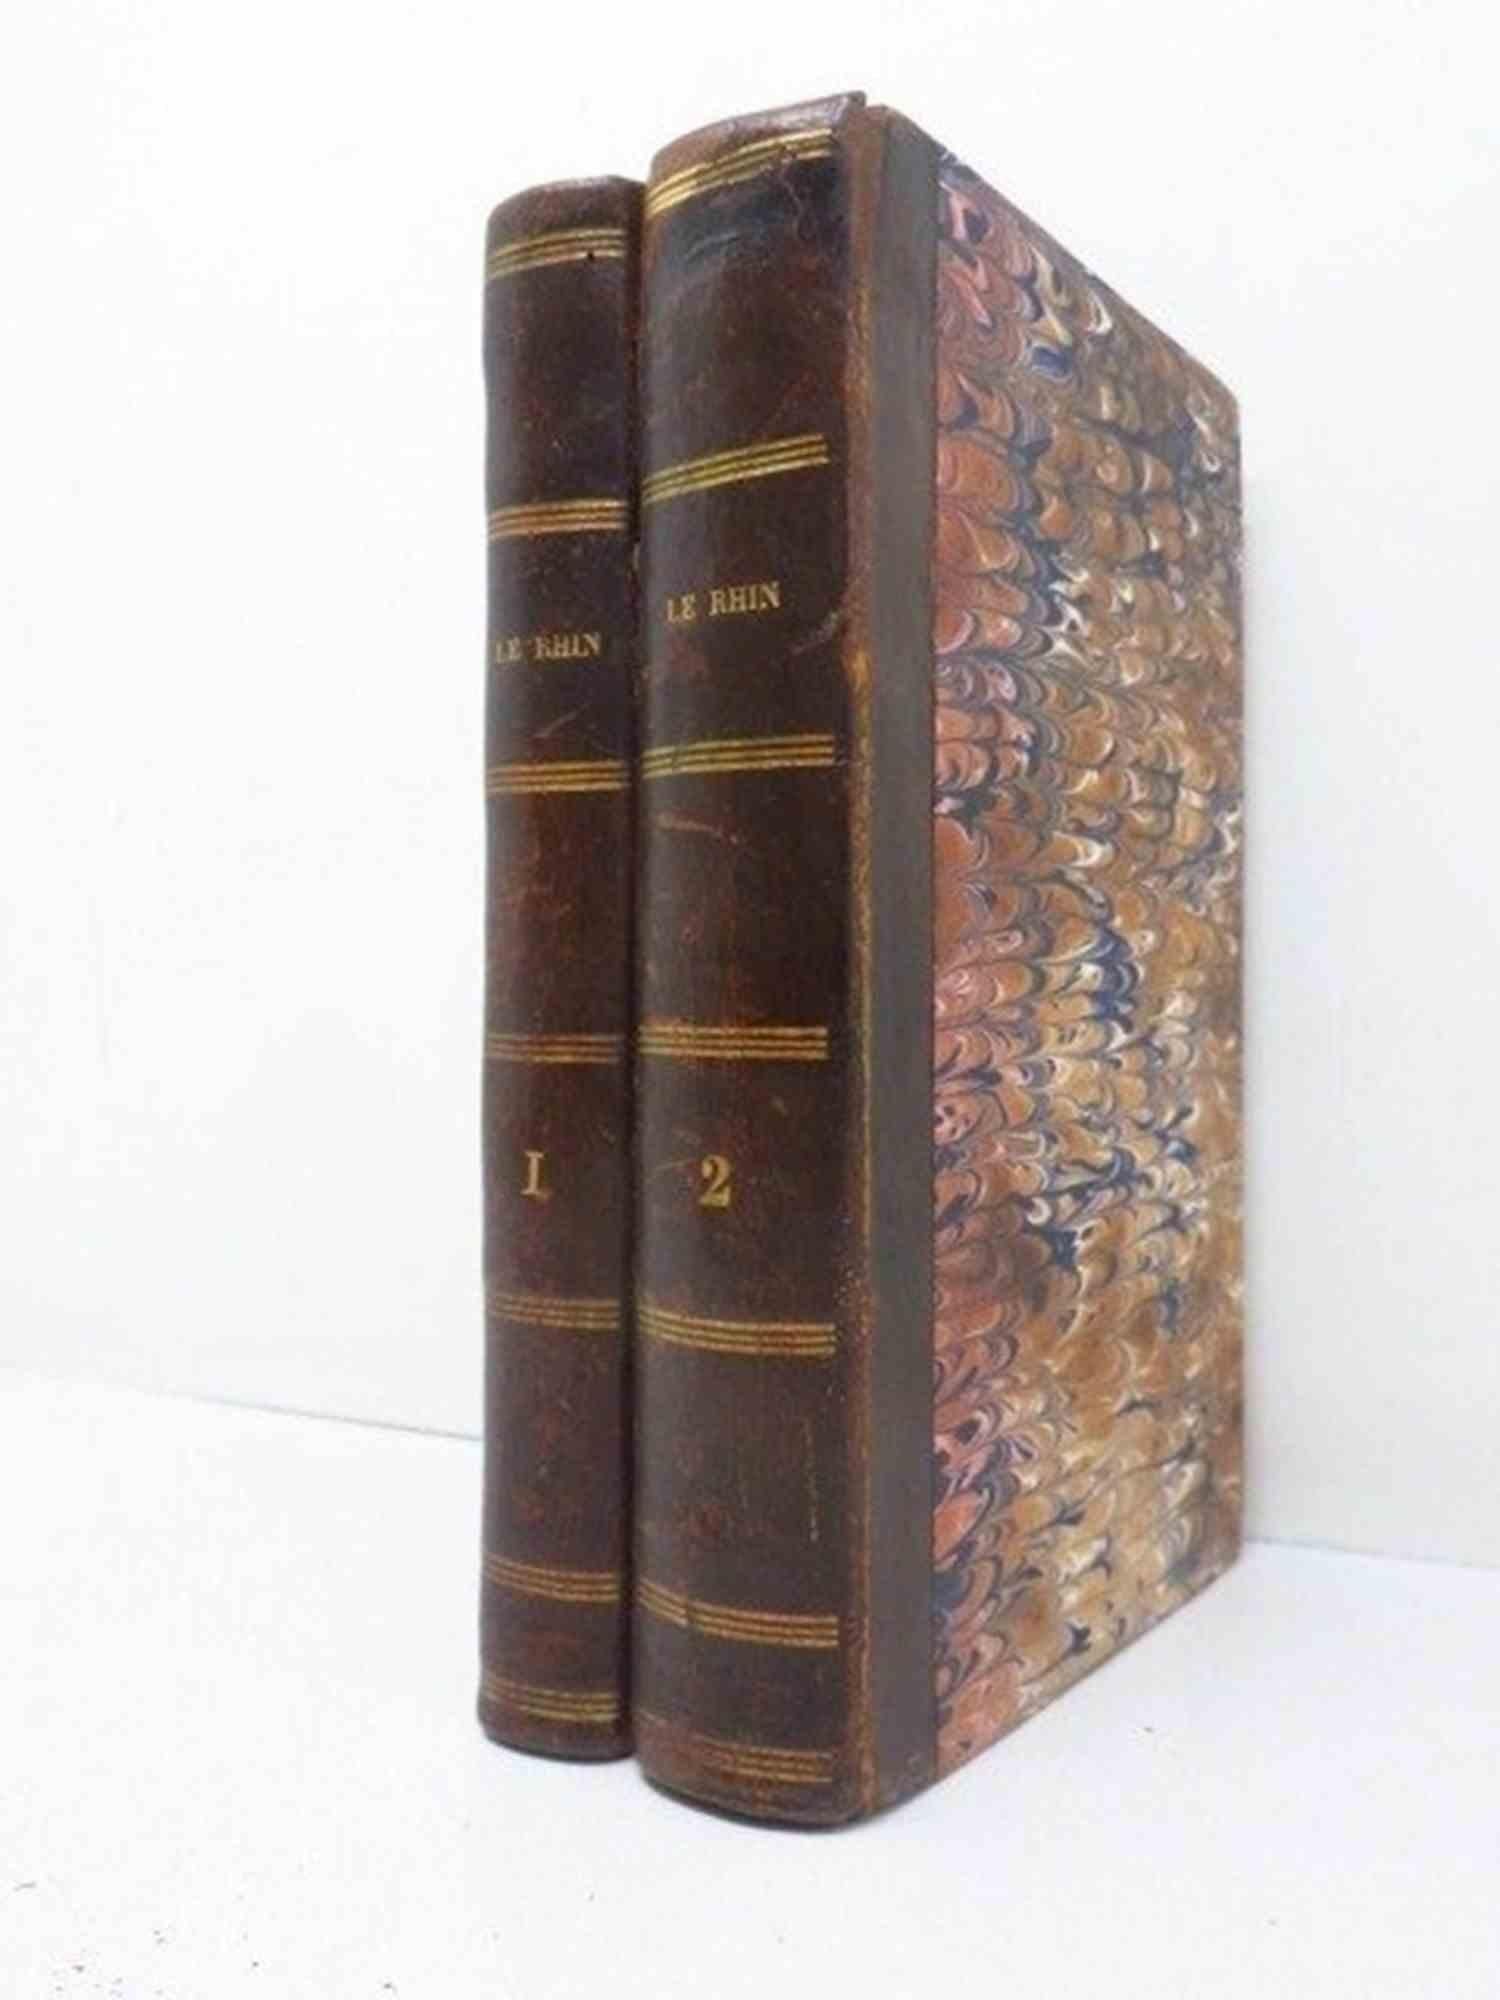 Le Rhin. Lettres à un ami is a rare book by Victor Hugo published in 1842.

Edited by H. L. Delloye – Paris.

Original edition in a coeval half leather binding.

2 volumes in-8°(21 x 12.5 cm) 368 + 653 pages